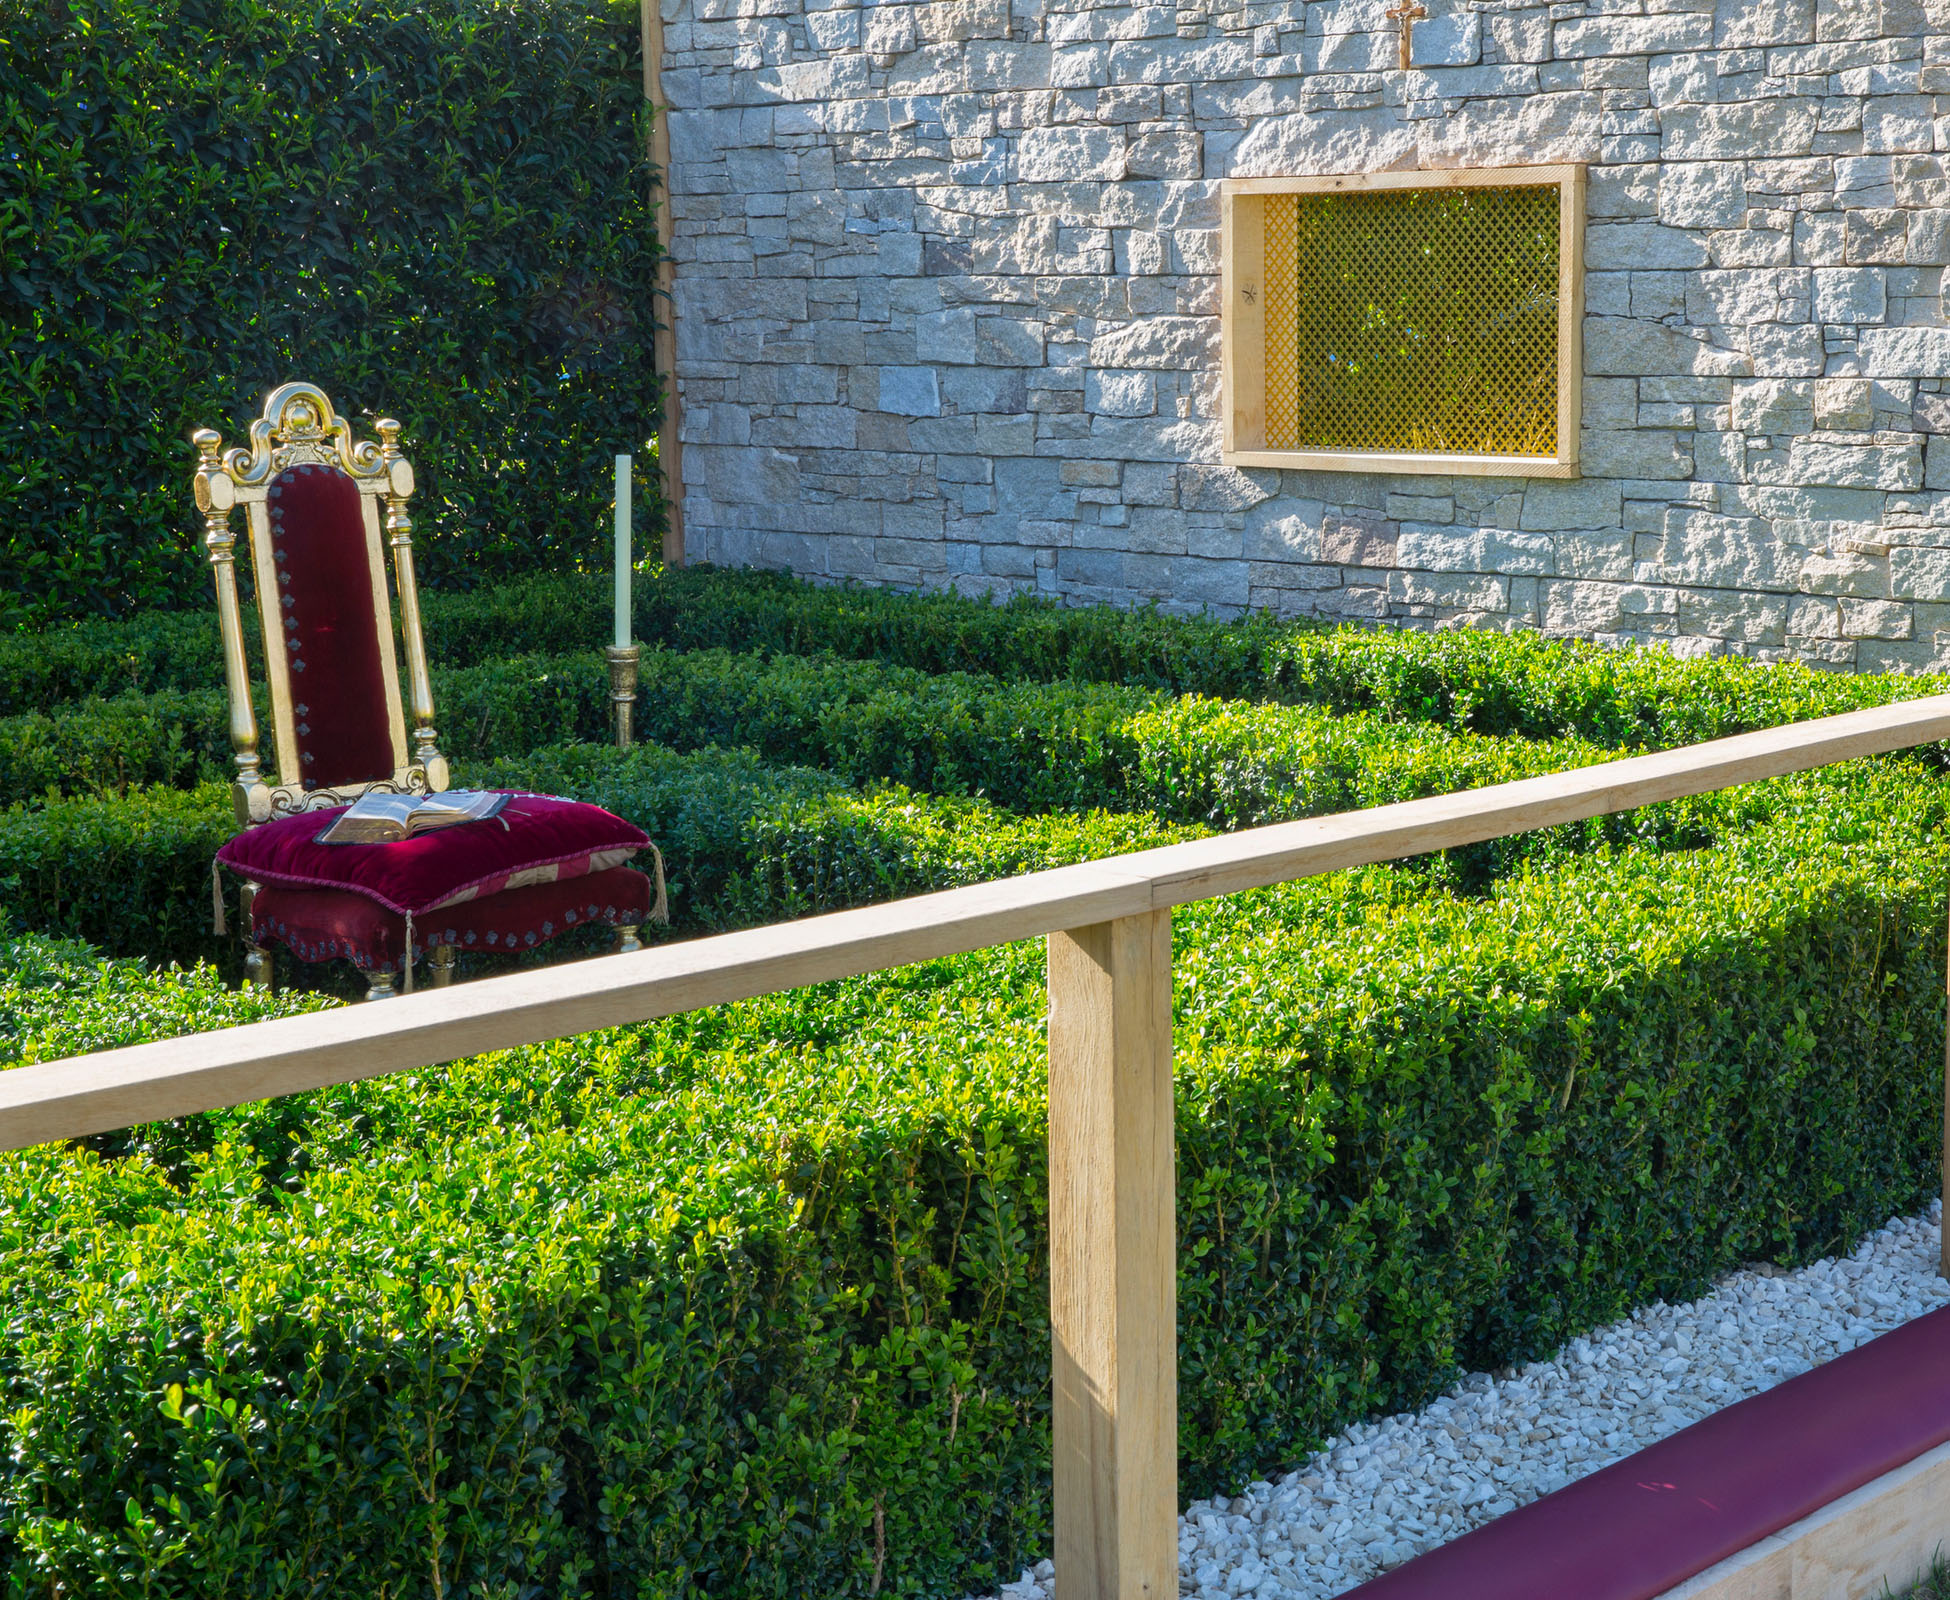 The red velvet chair in the controlled garden is surrounded by clipped evergreen box hedges.